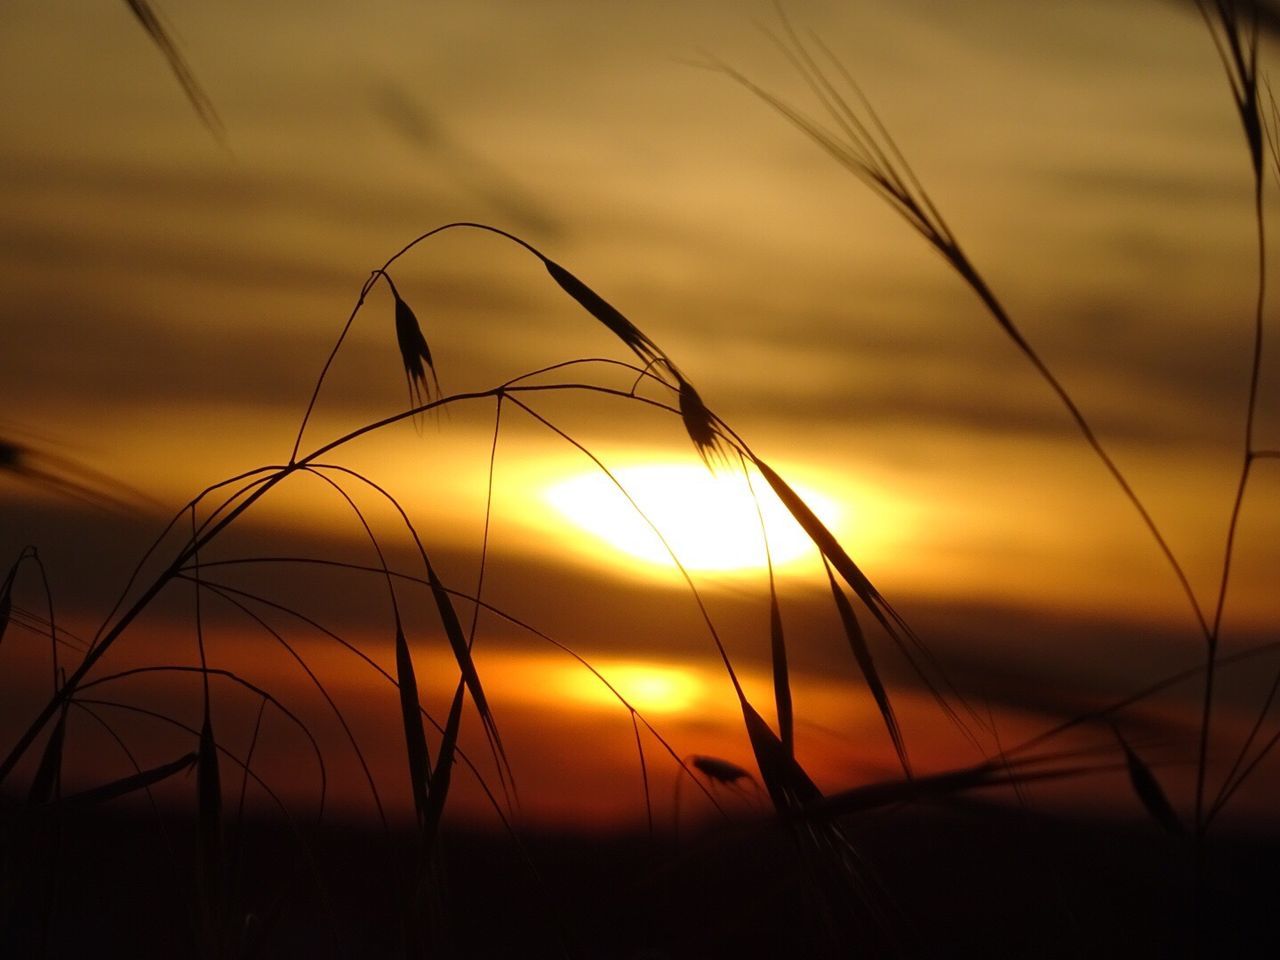 CLOSE-UP OF SILHOUETTE GRASS AGAINST SUNSET SKY